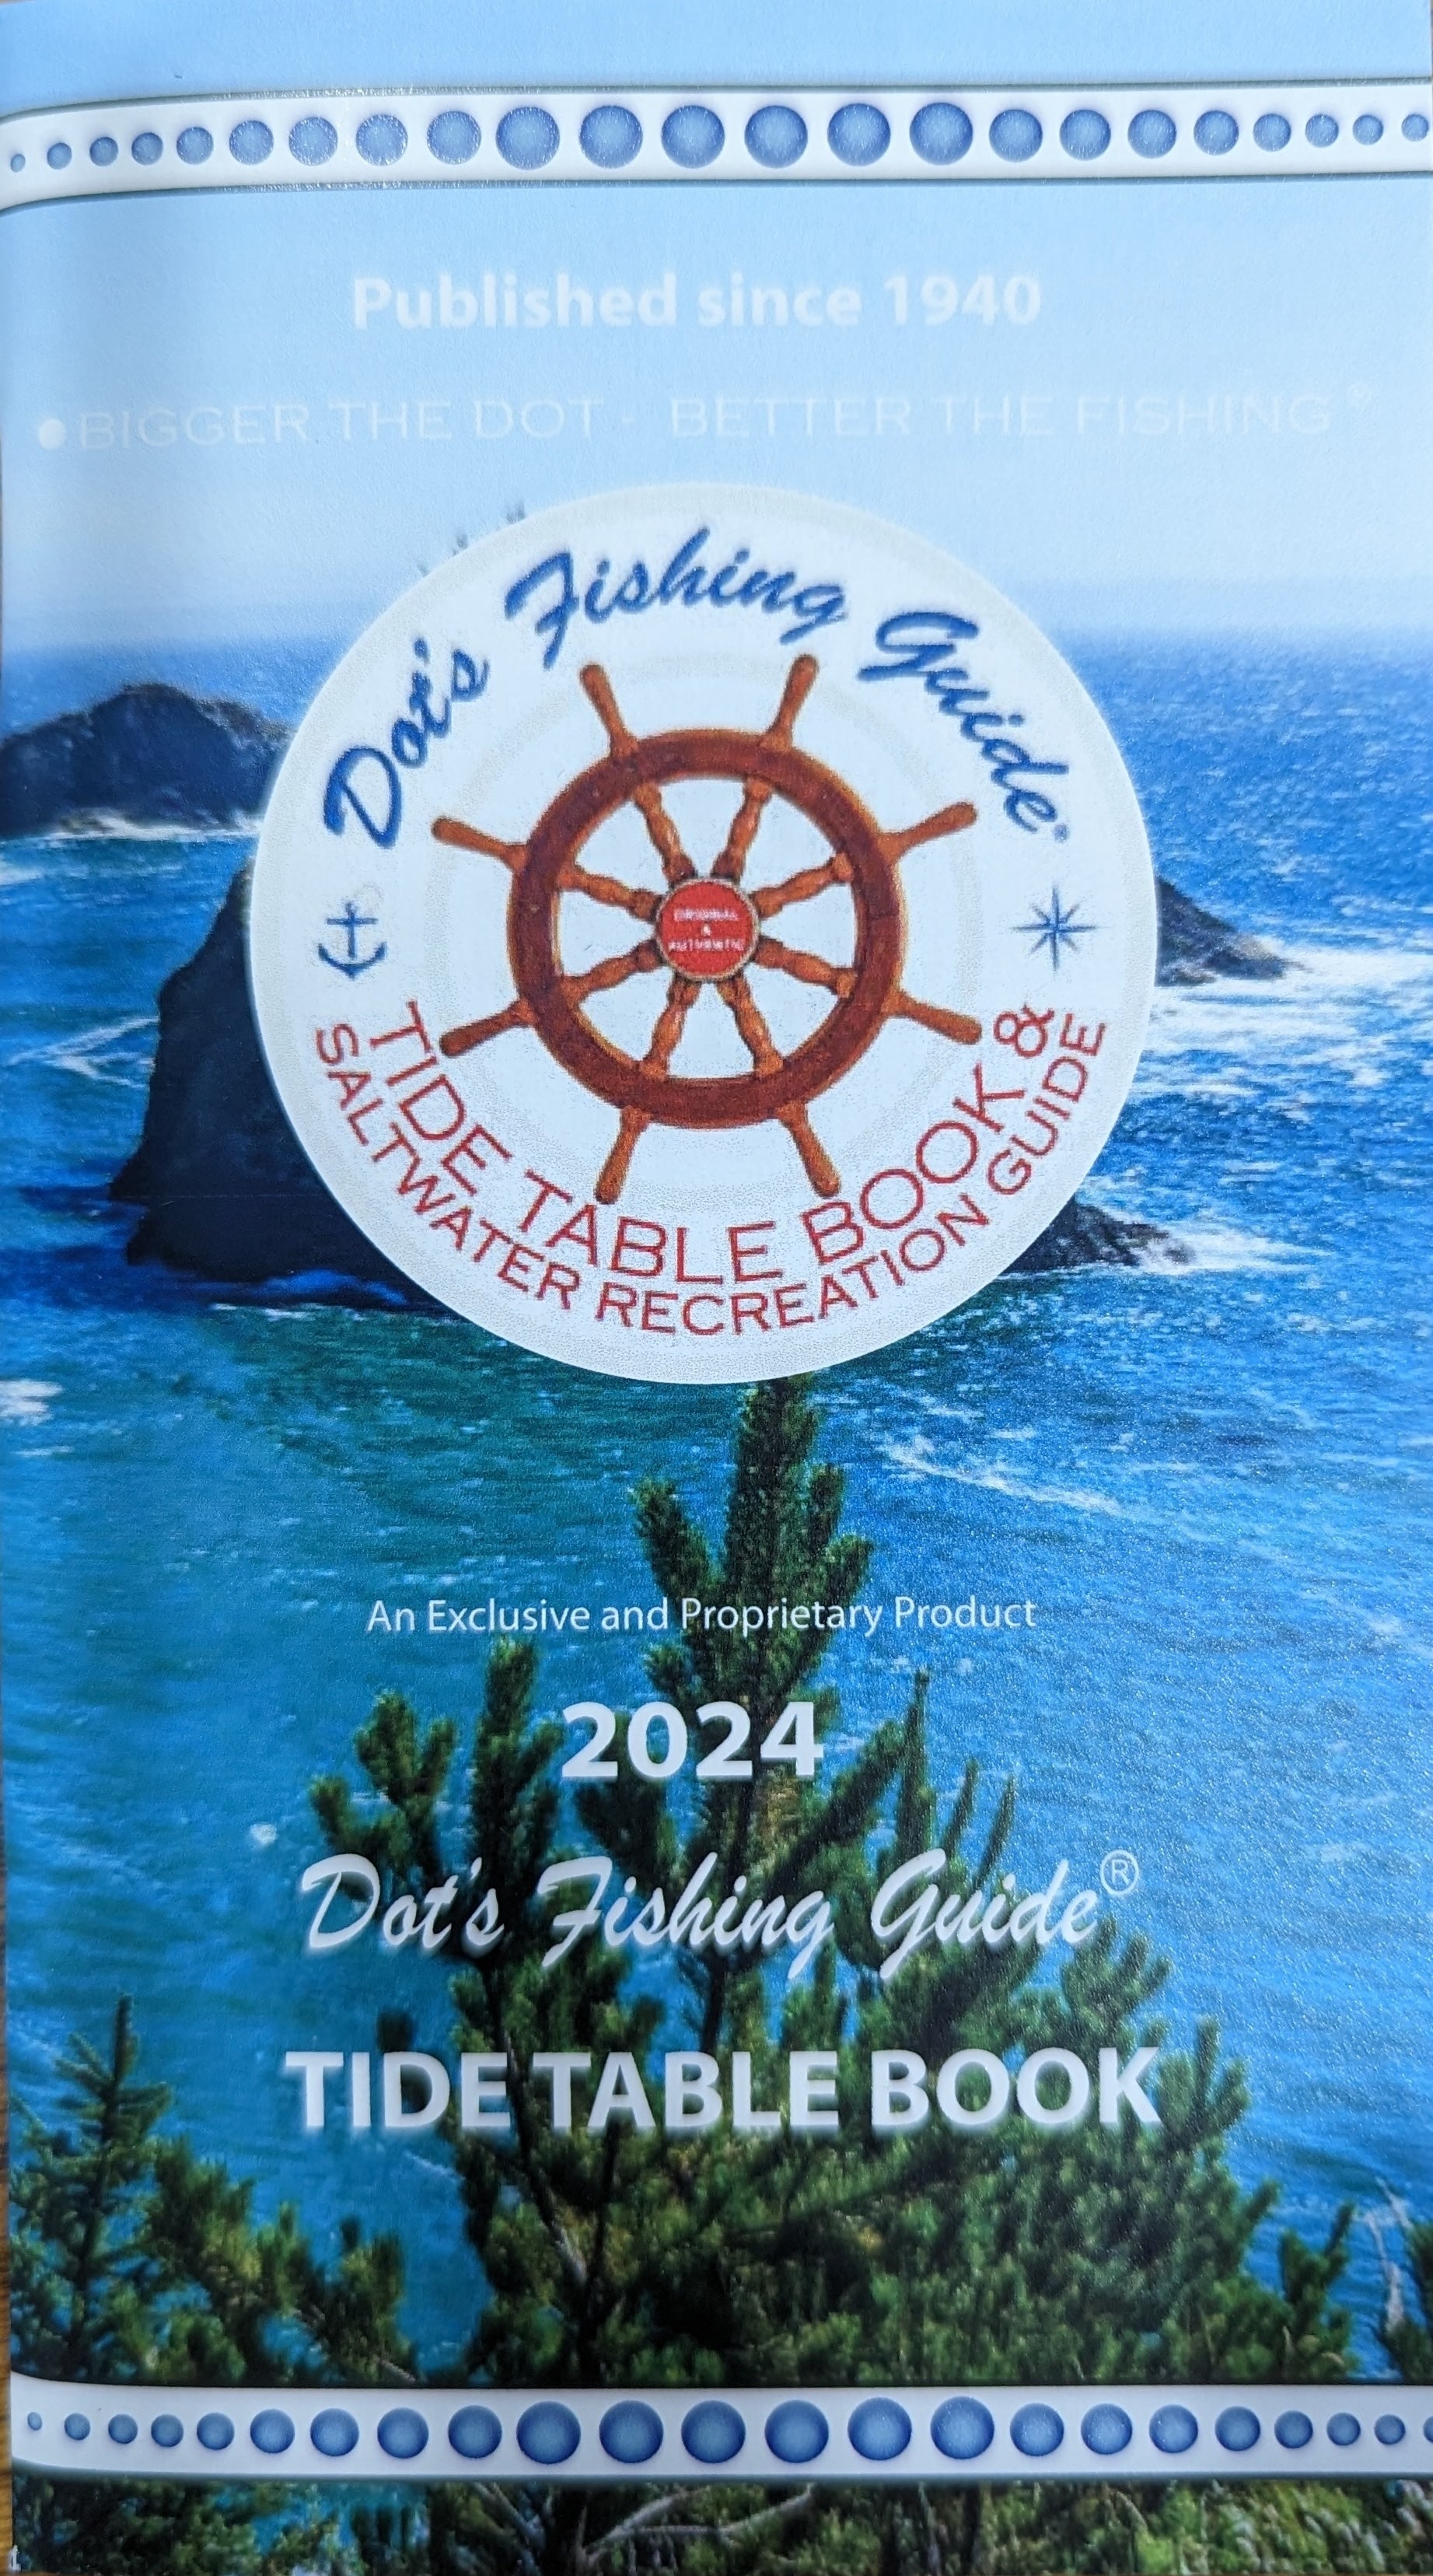 2024 Tide Tables & Dot's Fishing Guide-Puget Sound - Captain's